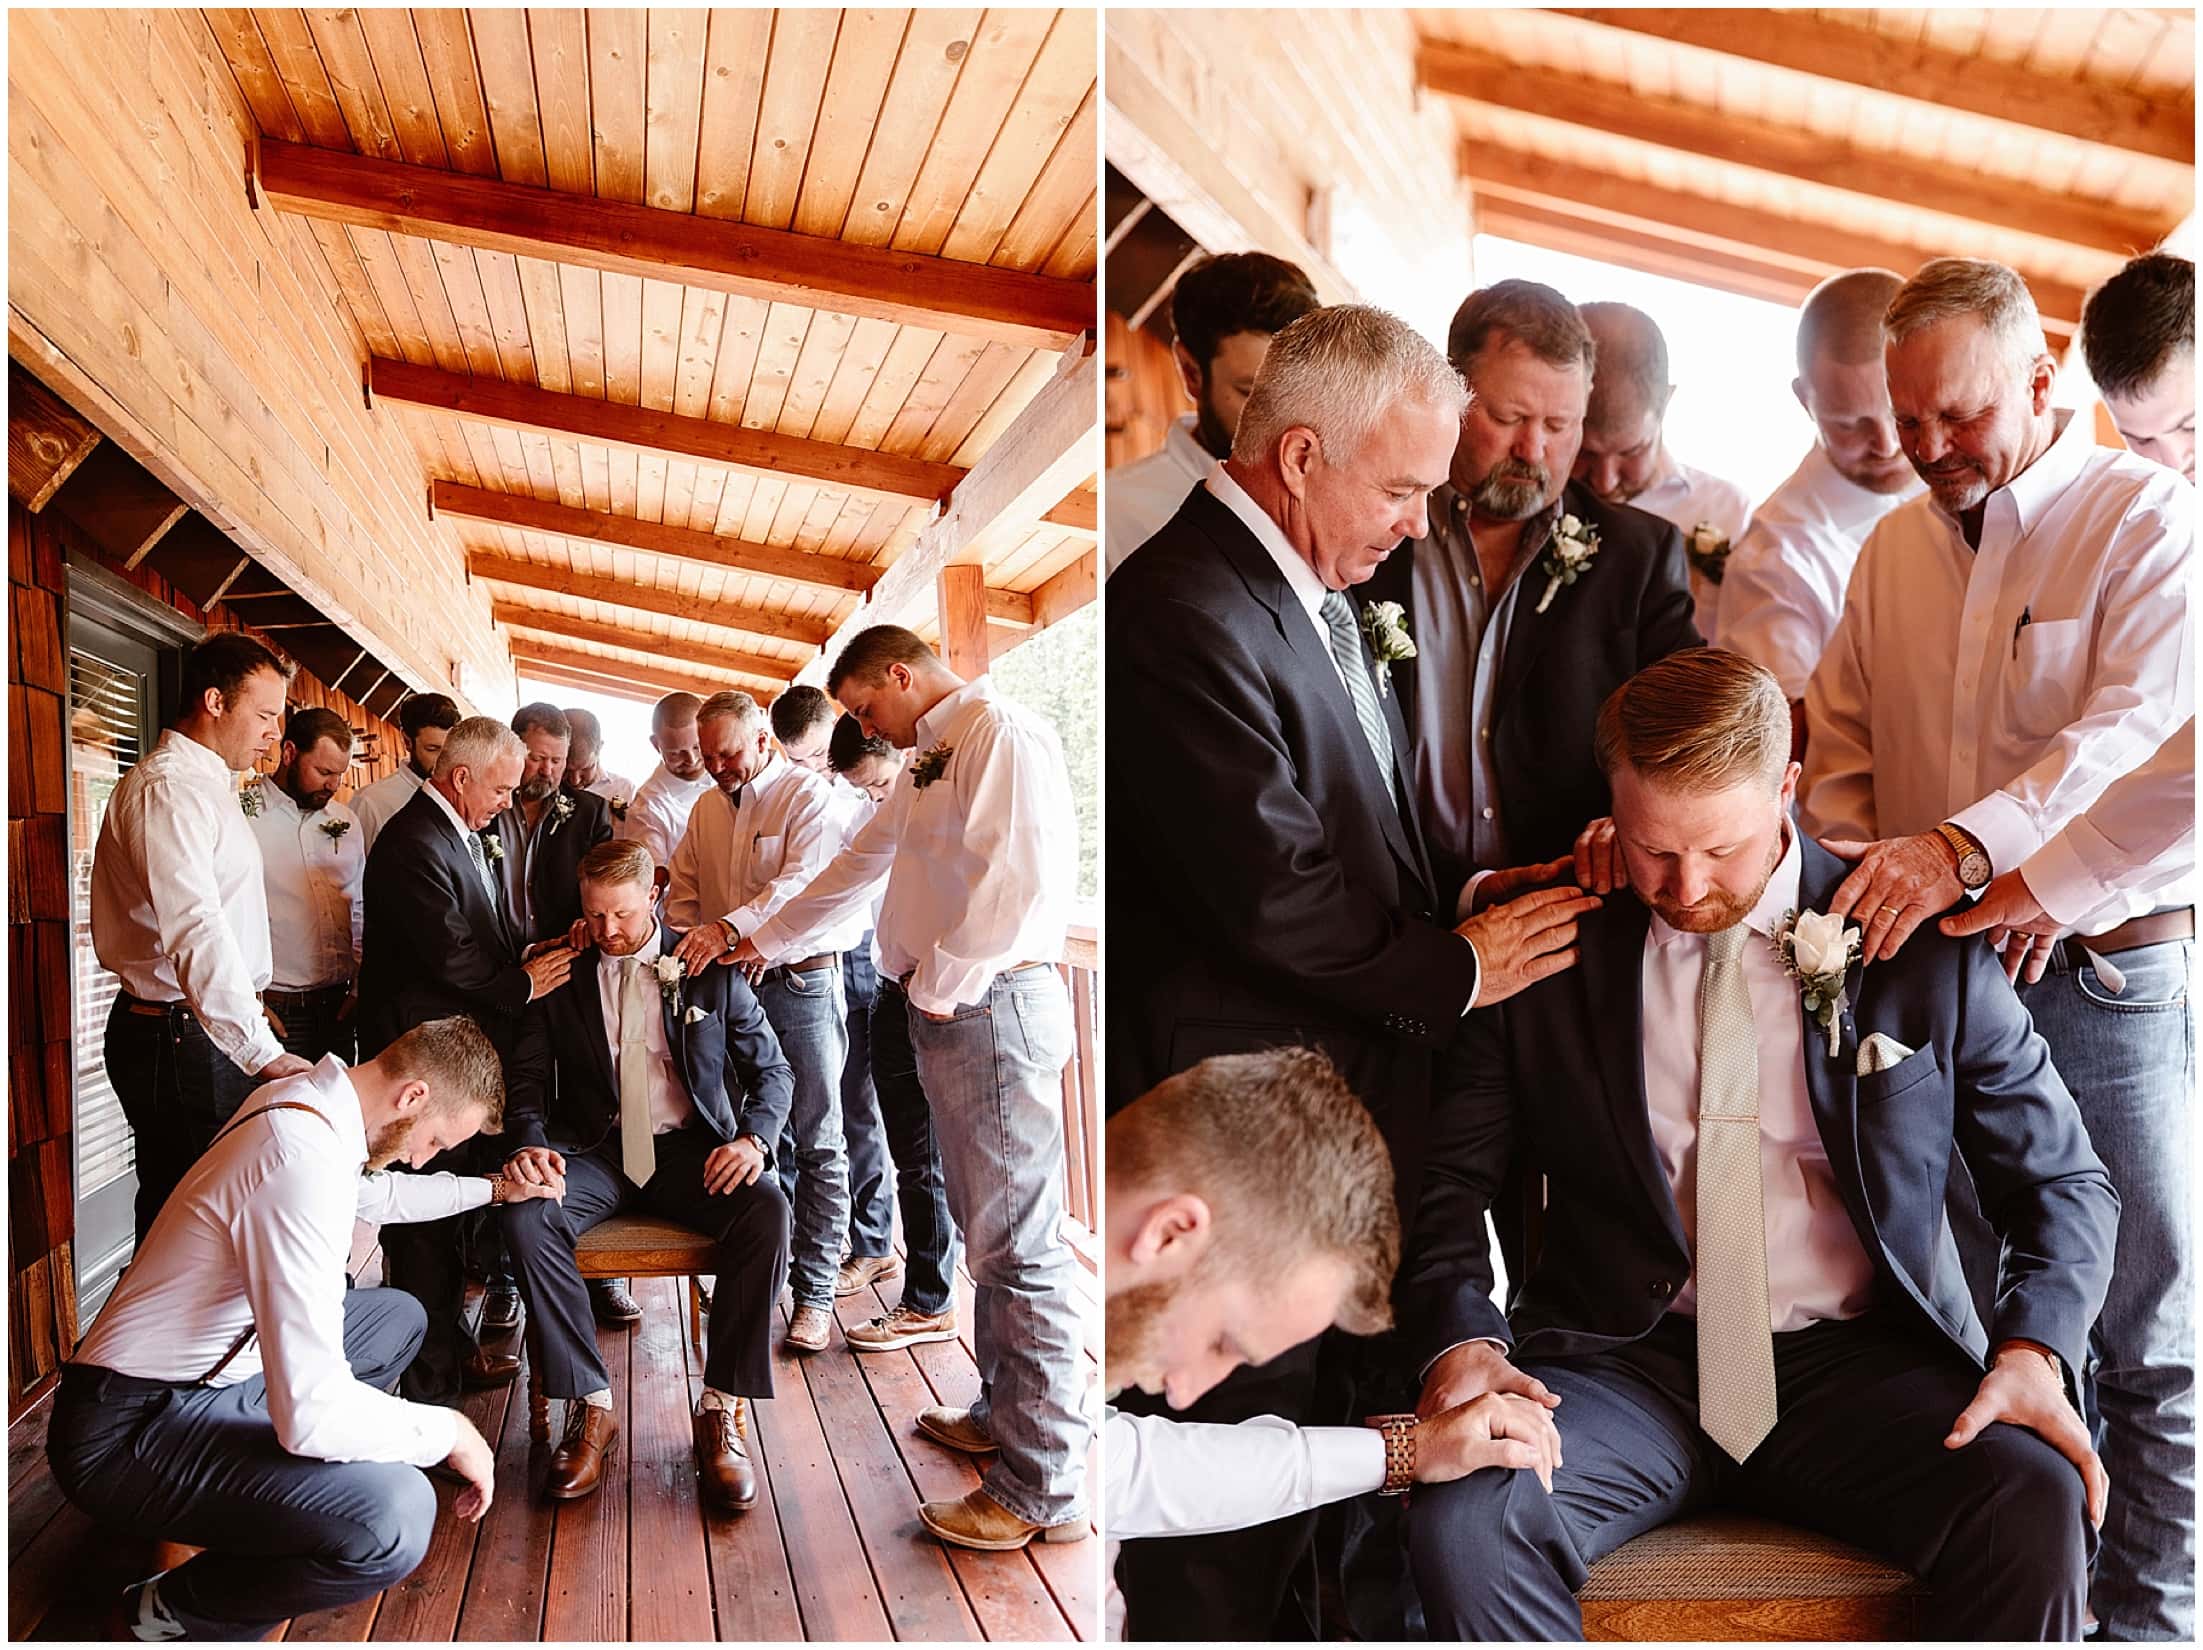 groomsmen praying over groom, Aspen Lodge, Red River New Mexico, Red River New Mexico Wedding, Weddings in New Mexico, Destination mountain wedding, destination mountain elopement, elopements in new mexico, places to get married in new mexico, destination elopement photographer, mountain wedding photographer, new mexico wedding photographer, new mexico elopement photographer, brit nicole photography, cabin wedding, new mexico cabin wedding, mountain landscape for wedding, small intimate mountain wedding, small intimate river wedding, wedding photographer in new mexico, junebug weddings, the knot, wedding wire, 41 productions with lindsay gomez, dallas texas bride, DJ Allen Gallegos, Tao Cakes, New Mexico Wedding planner karen kelly, barnes jewelry, Lillian West bridal dress, Lang’s Bridal, enchanted florist wedding flowers, places to get married in texas, texas wedding photographer, texas elopement photographer, forest wedding, forest elopement, wooded area for wedding, wooded elopement, elopement in the woods, amarillo wedding photographer, amarillo elopement photographer